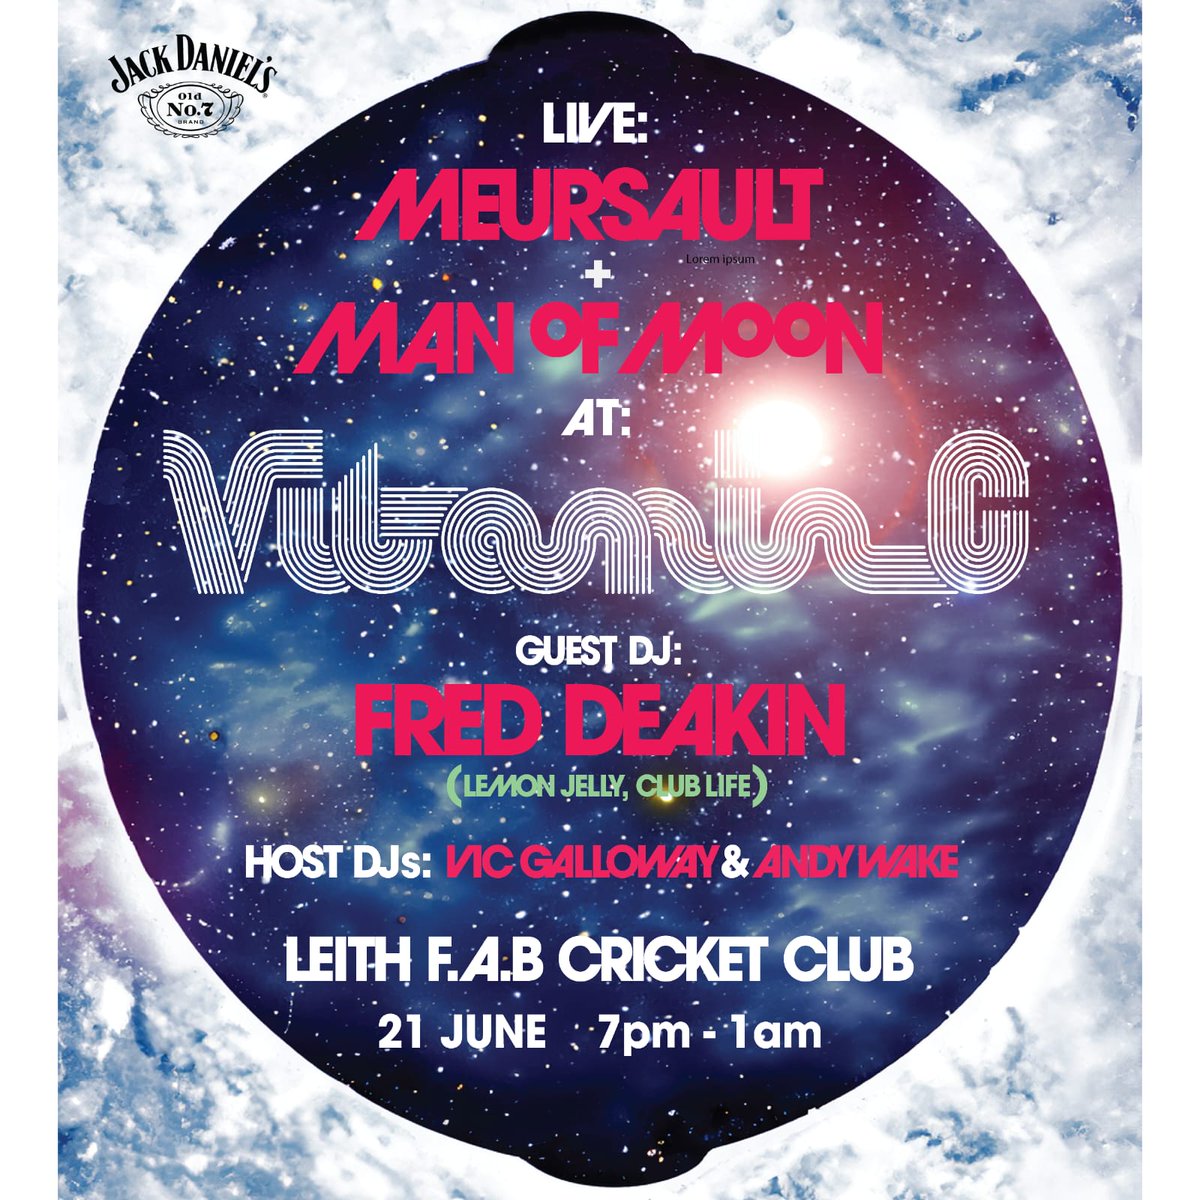 Club Life returns to Edinburgh this summer and as a warm up, I’m DJing on Friday June 21st at the FAB Cricket Club in Leith for @VicGalloway's top Vitamin C night alongside Meursault and @man__of__moon playing live. Can't wait - see you there! Tickets: tinyurl.com/vitcfred